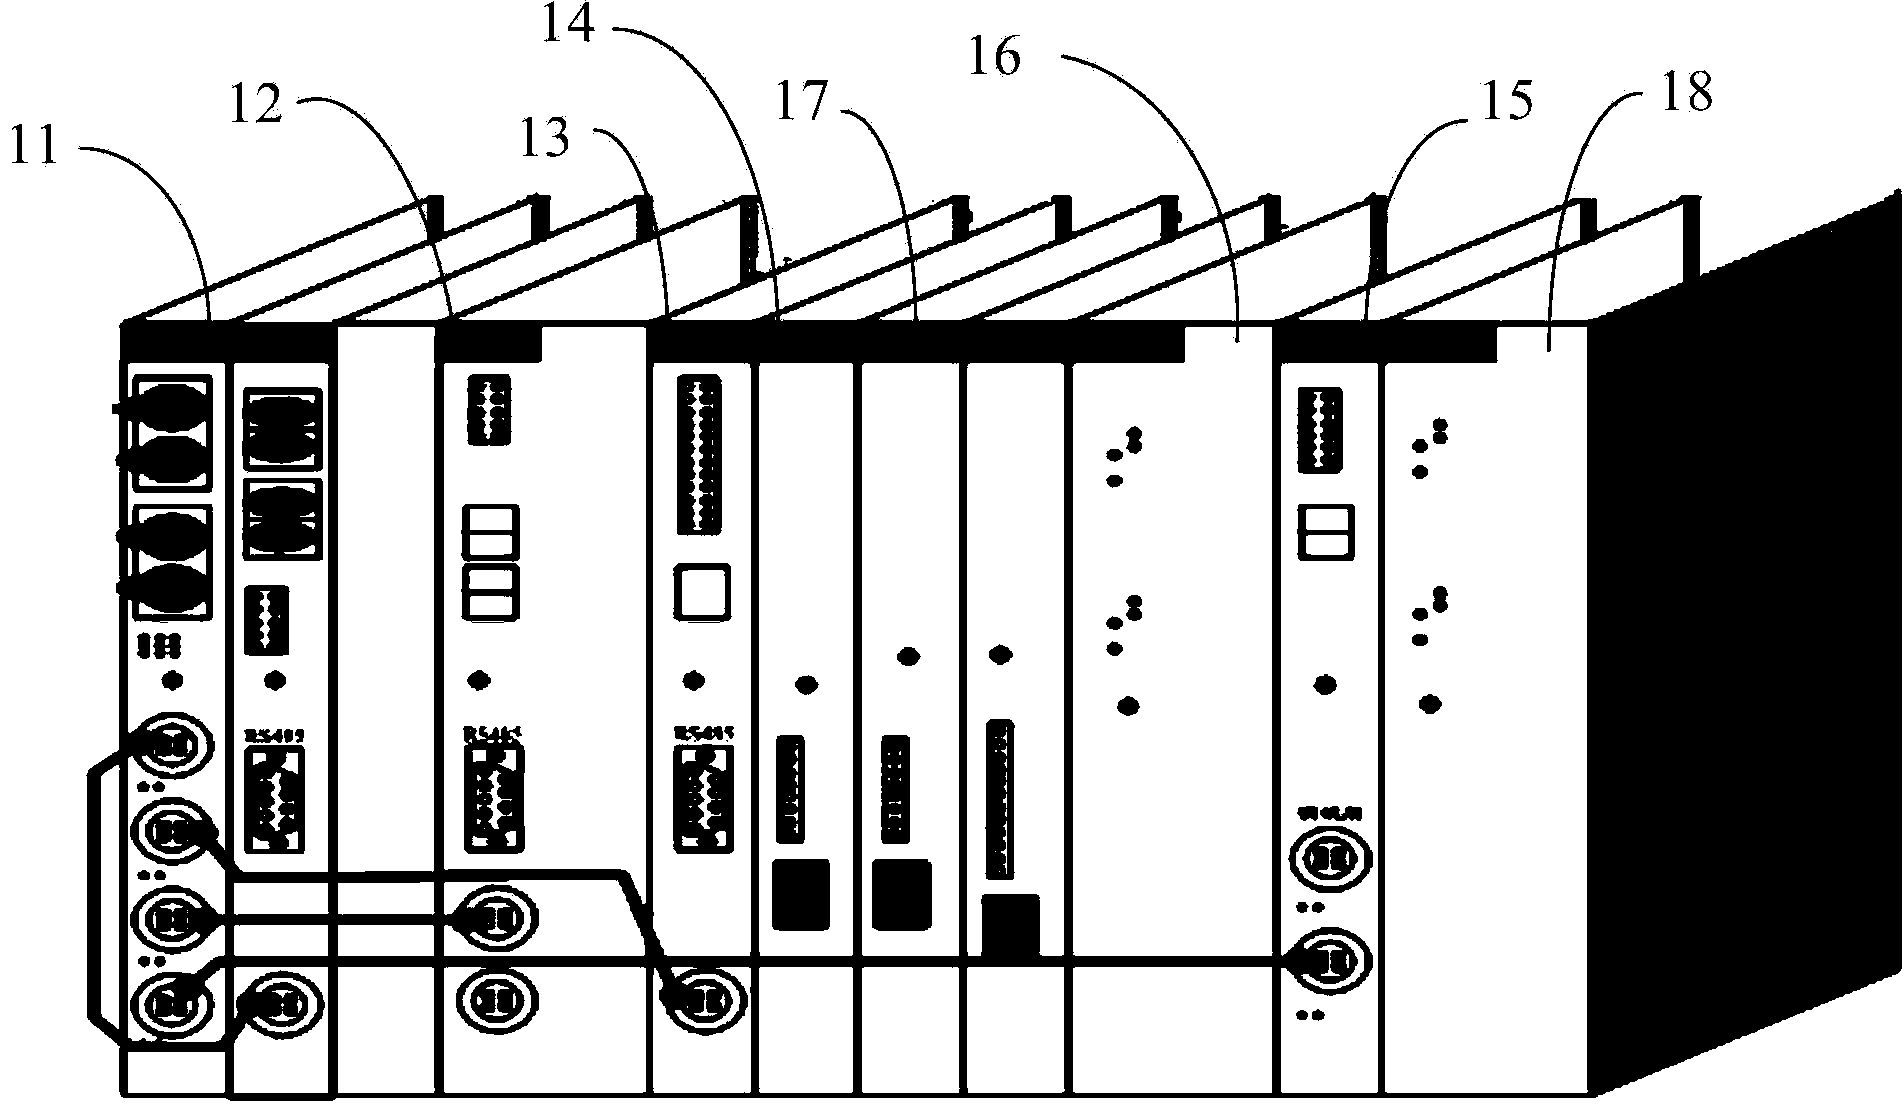 Terminal control device of network control system of high-speed multiple-unit train